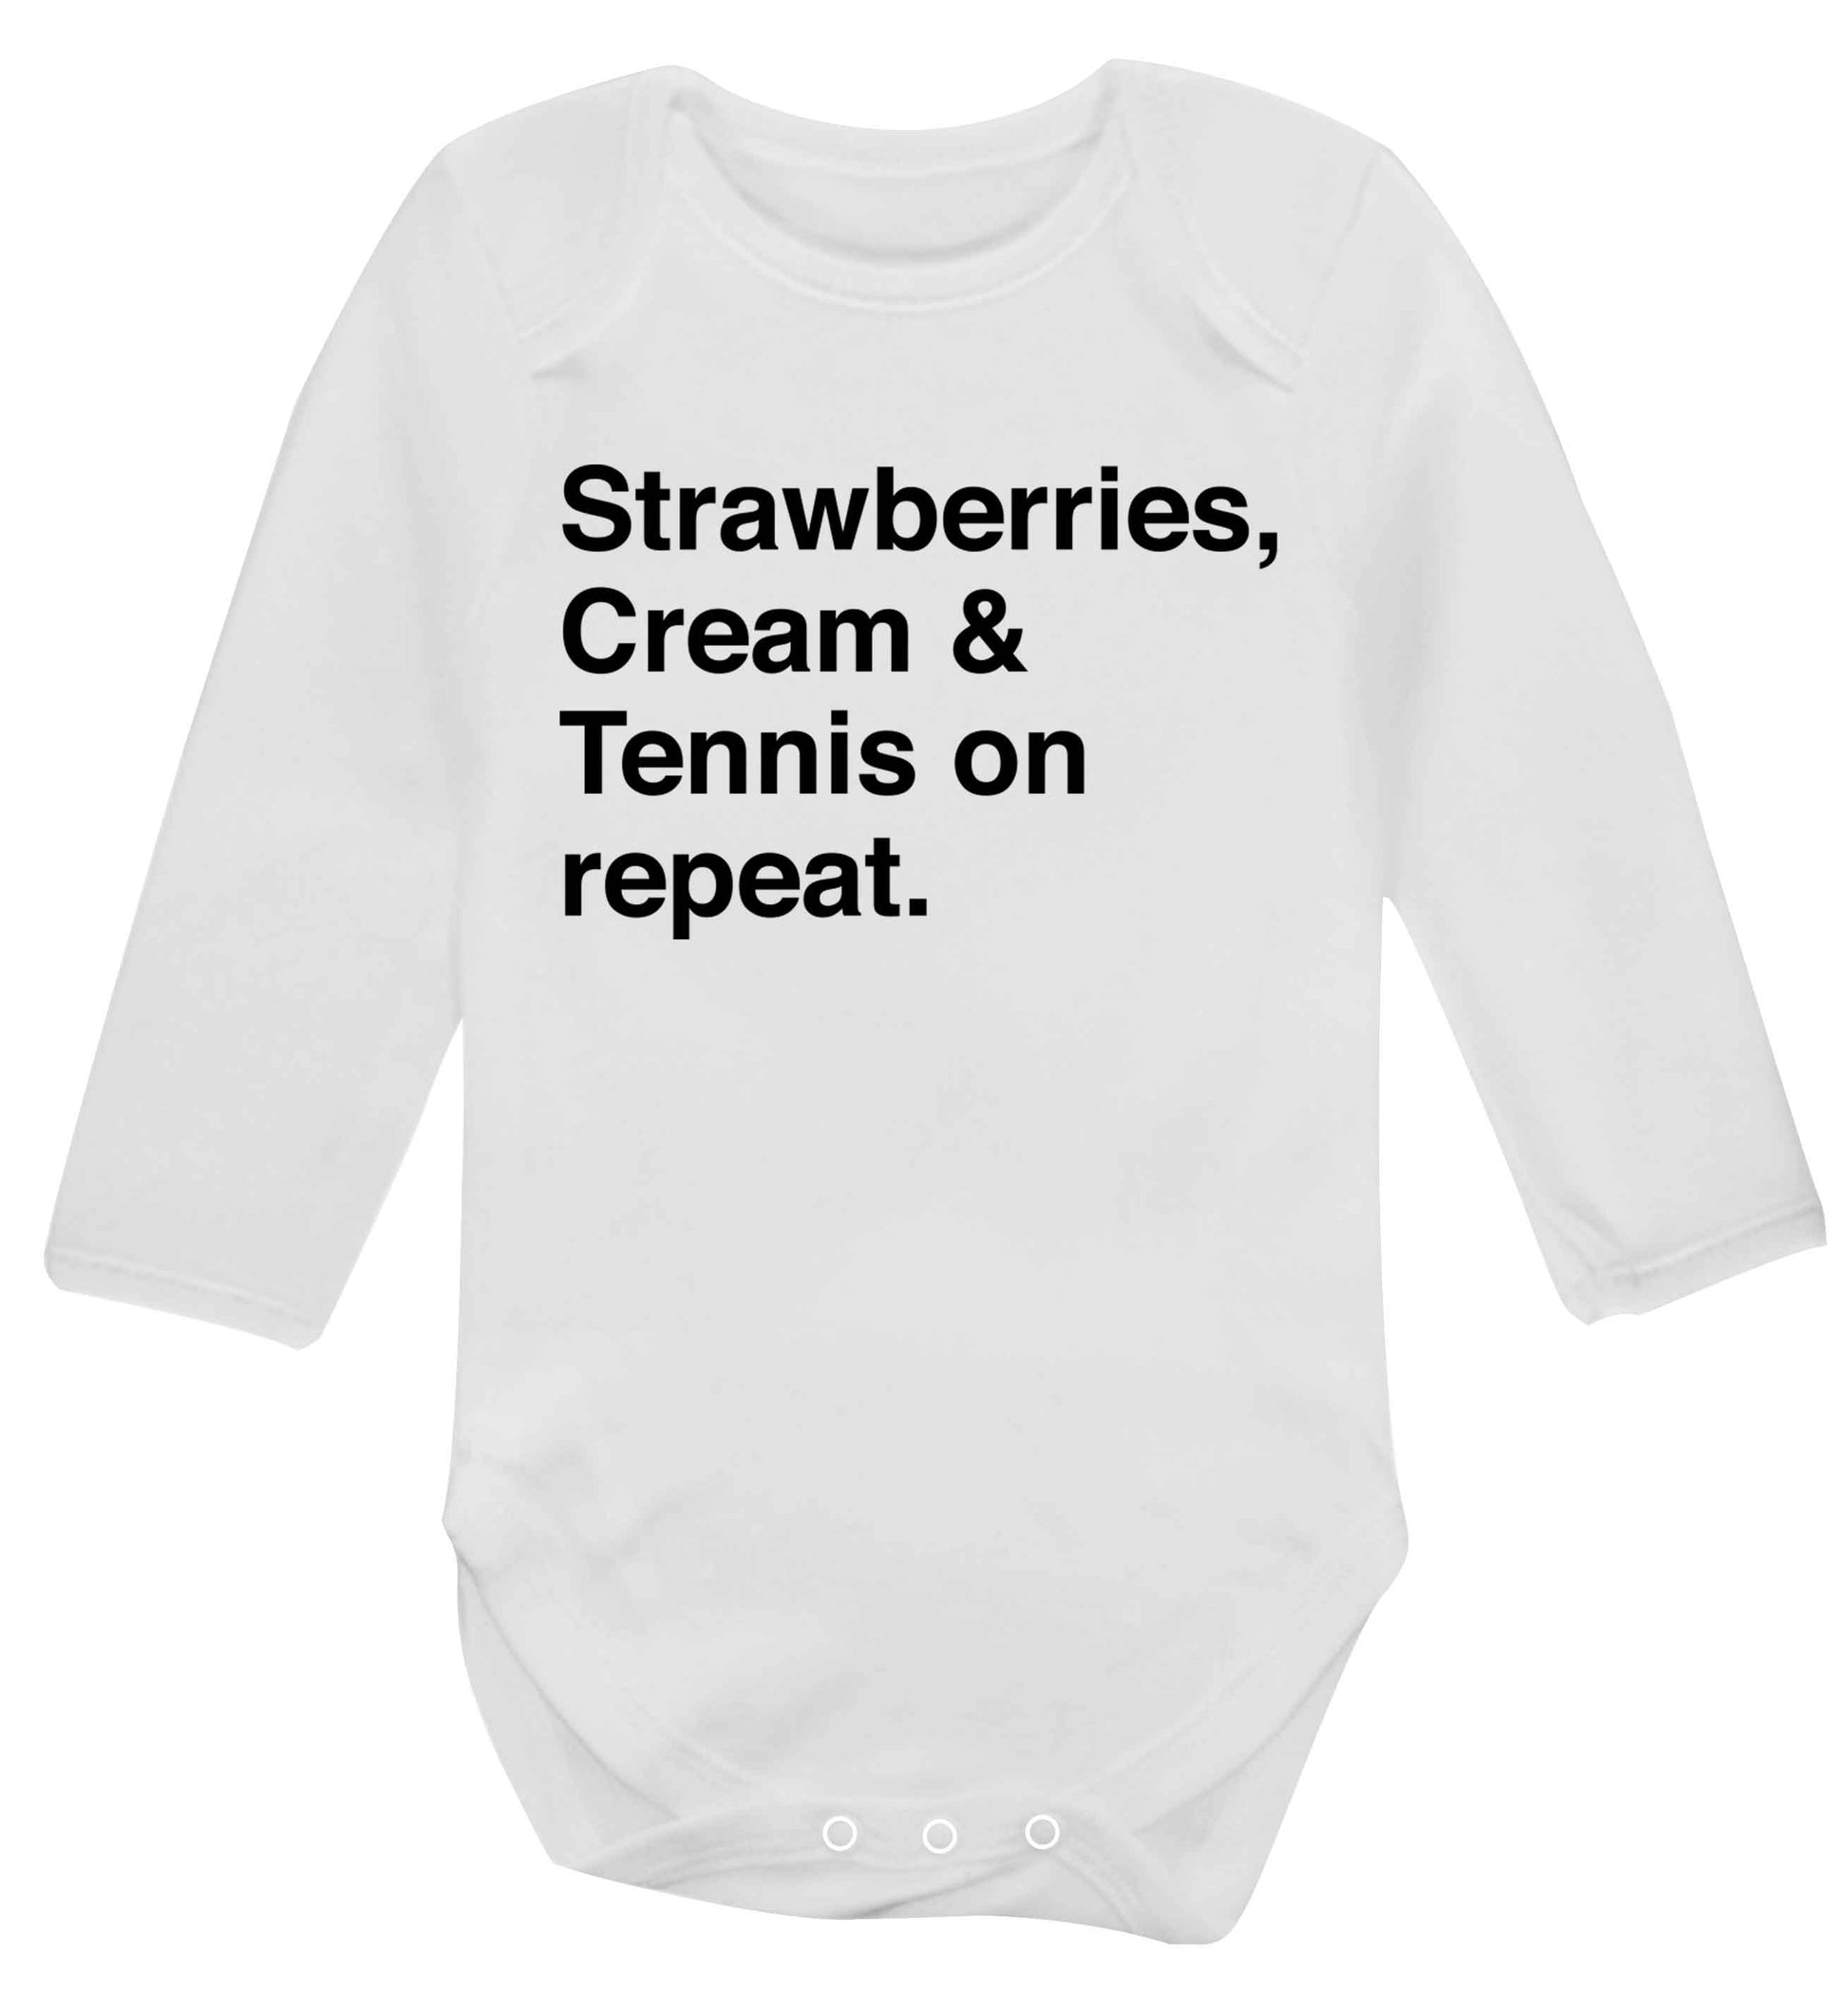 Strawberries, cream and tennis on repeat Baby Vest long sleeved white 6-12 months